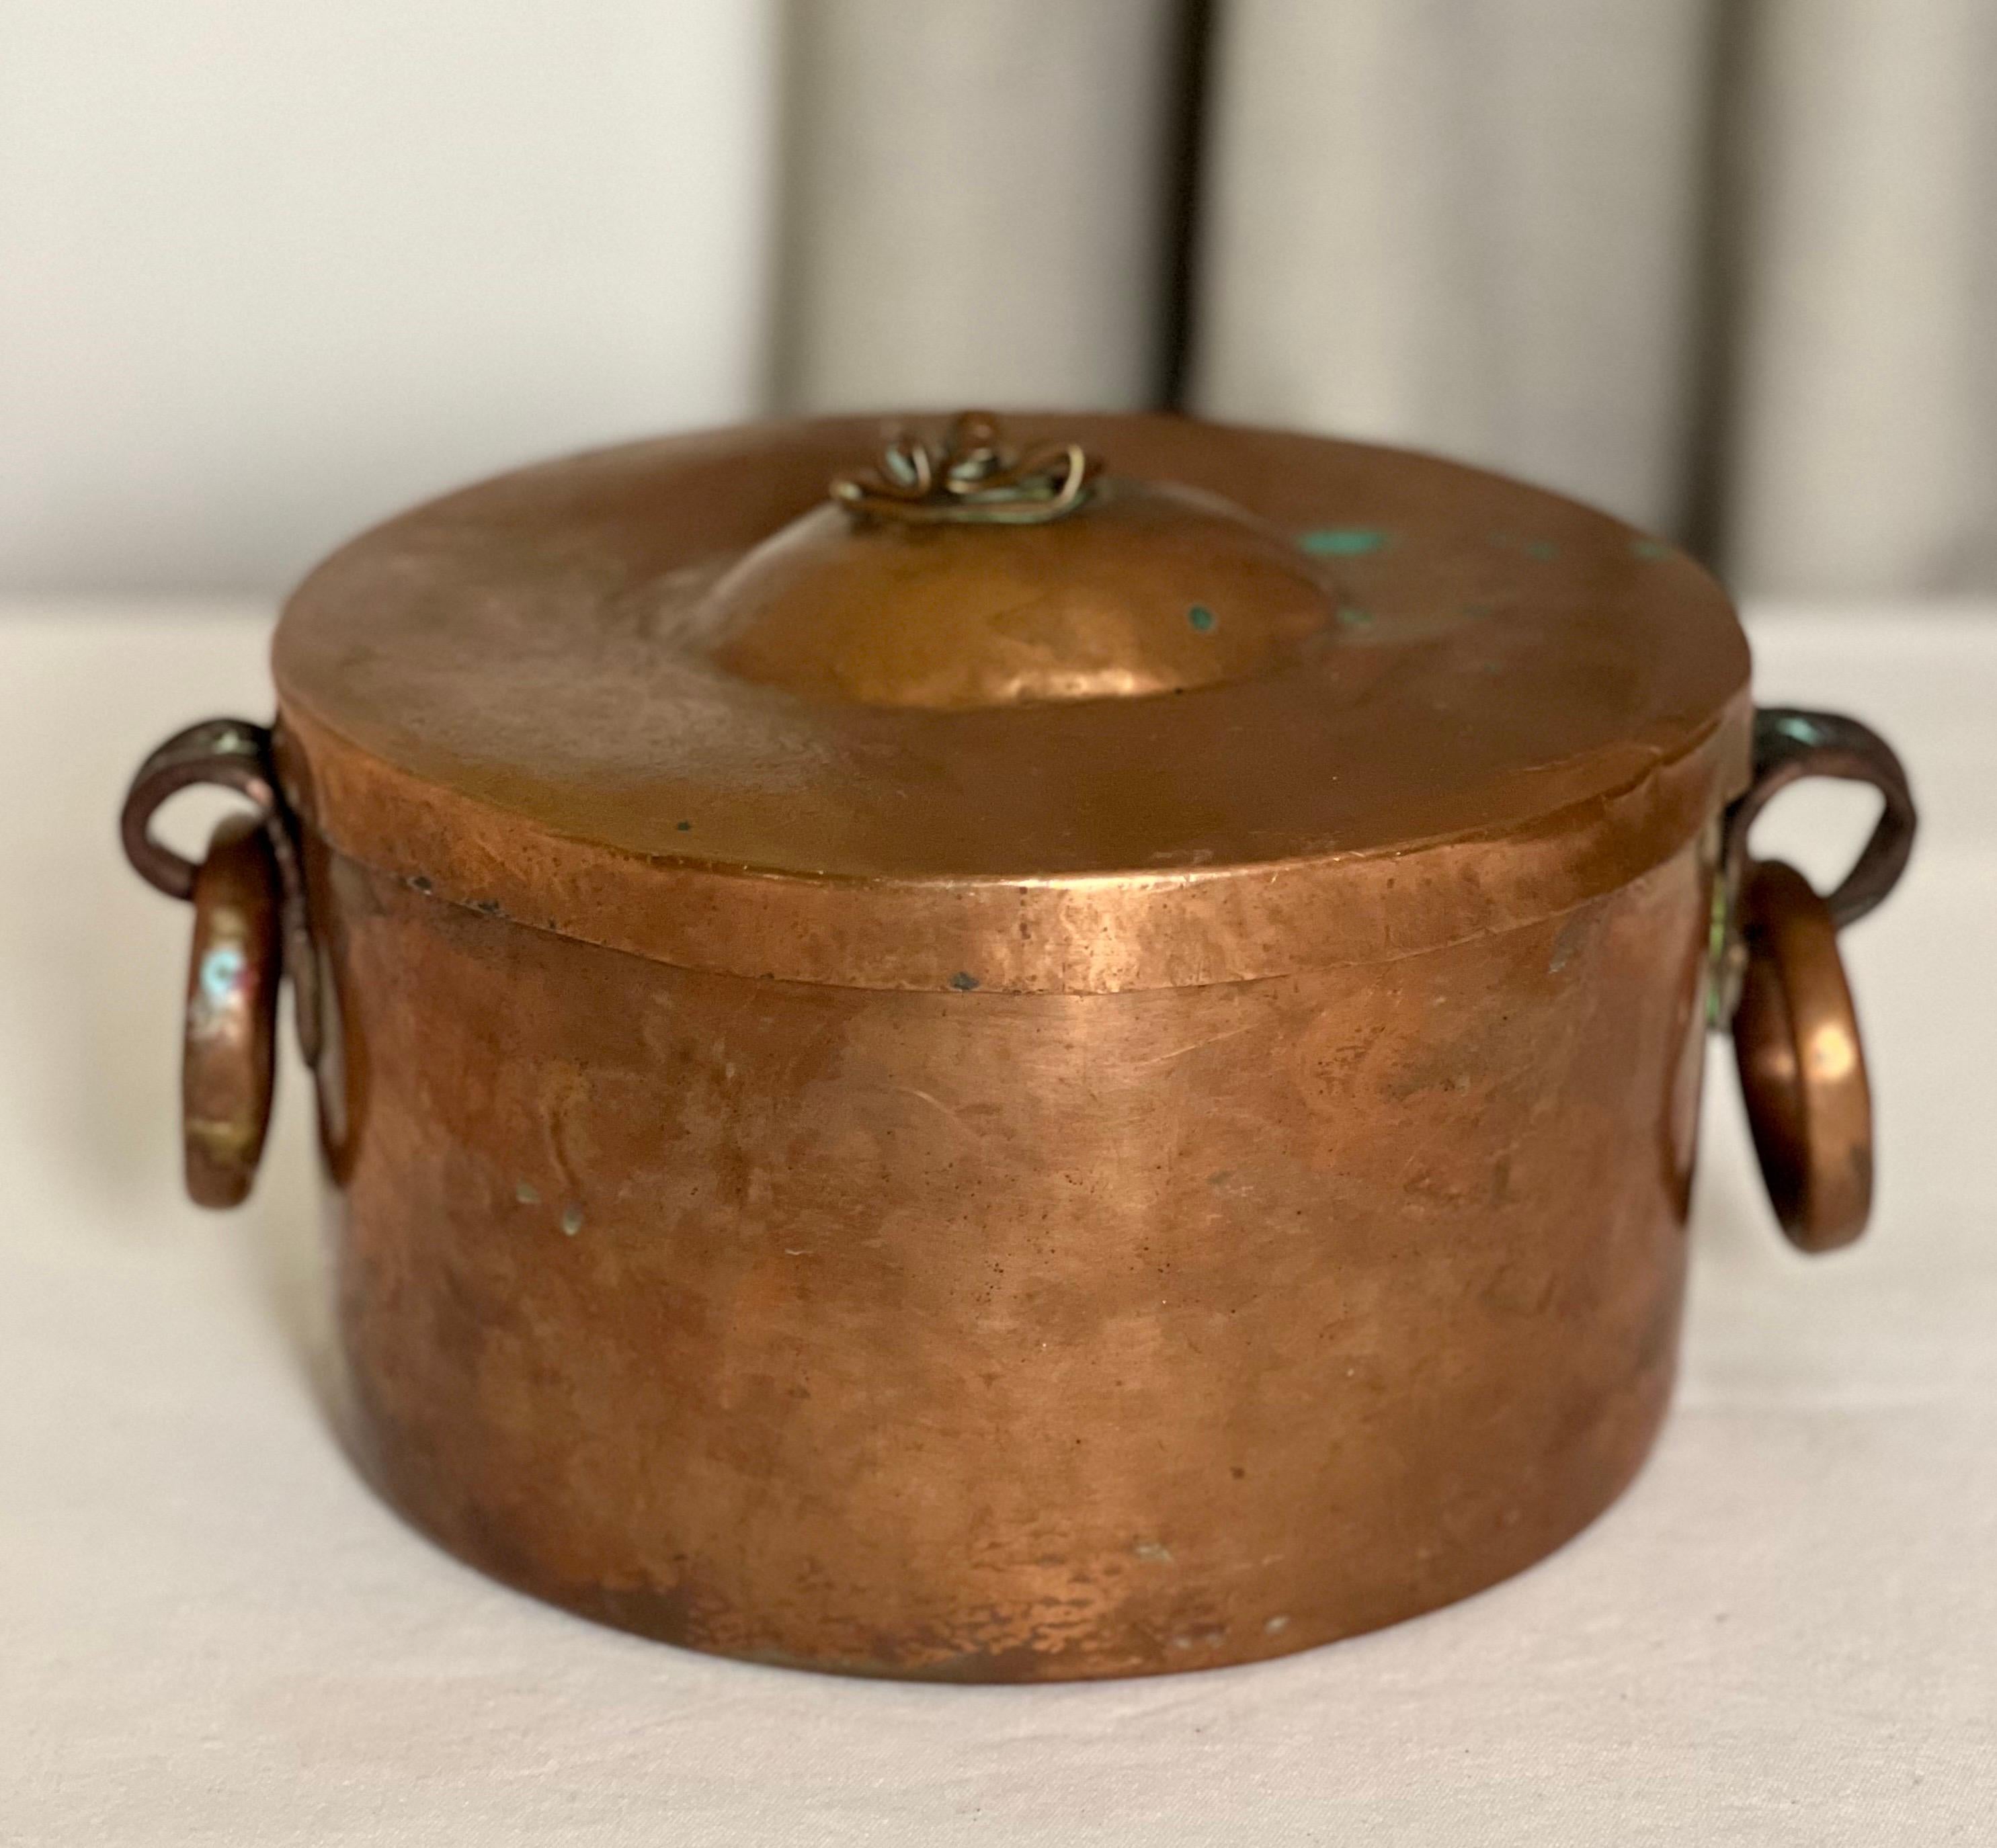 19th century French dovetailed copper braising pan or small pot with fitted lid.

This unique pot has two heavy drop ring copper handles with scrolled support brackets. A fitted lid features a charming, hand-formed knob giving it special character.